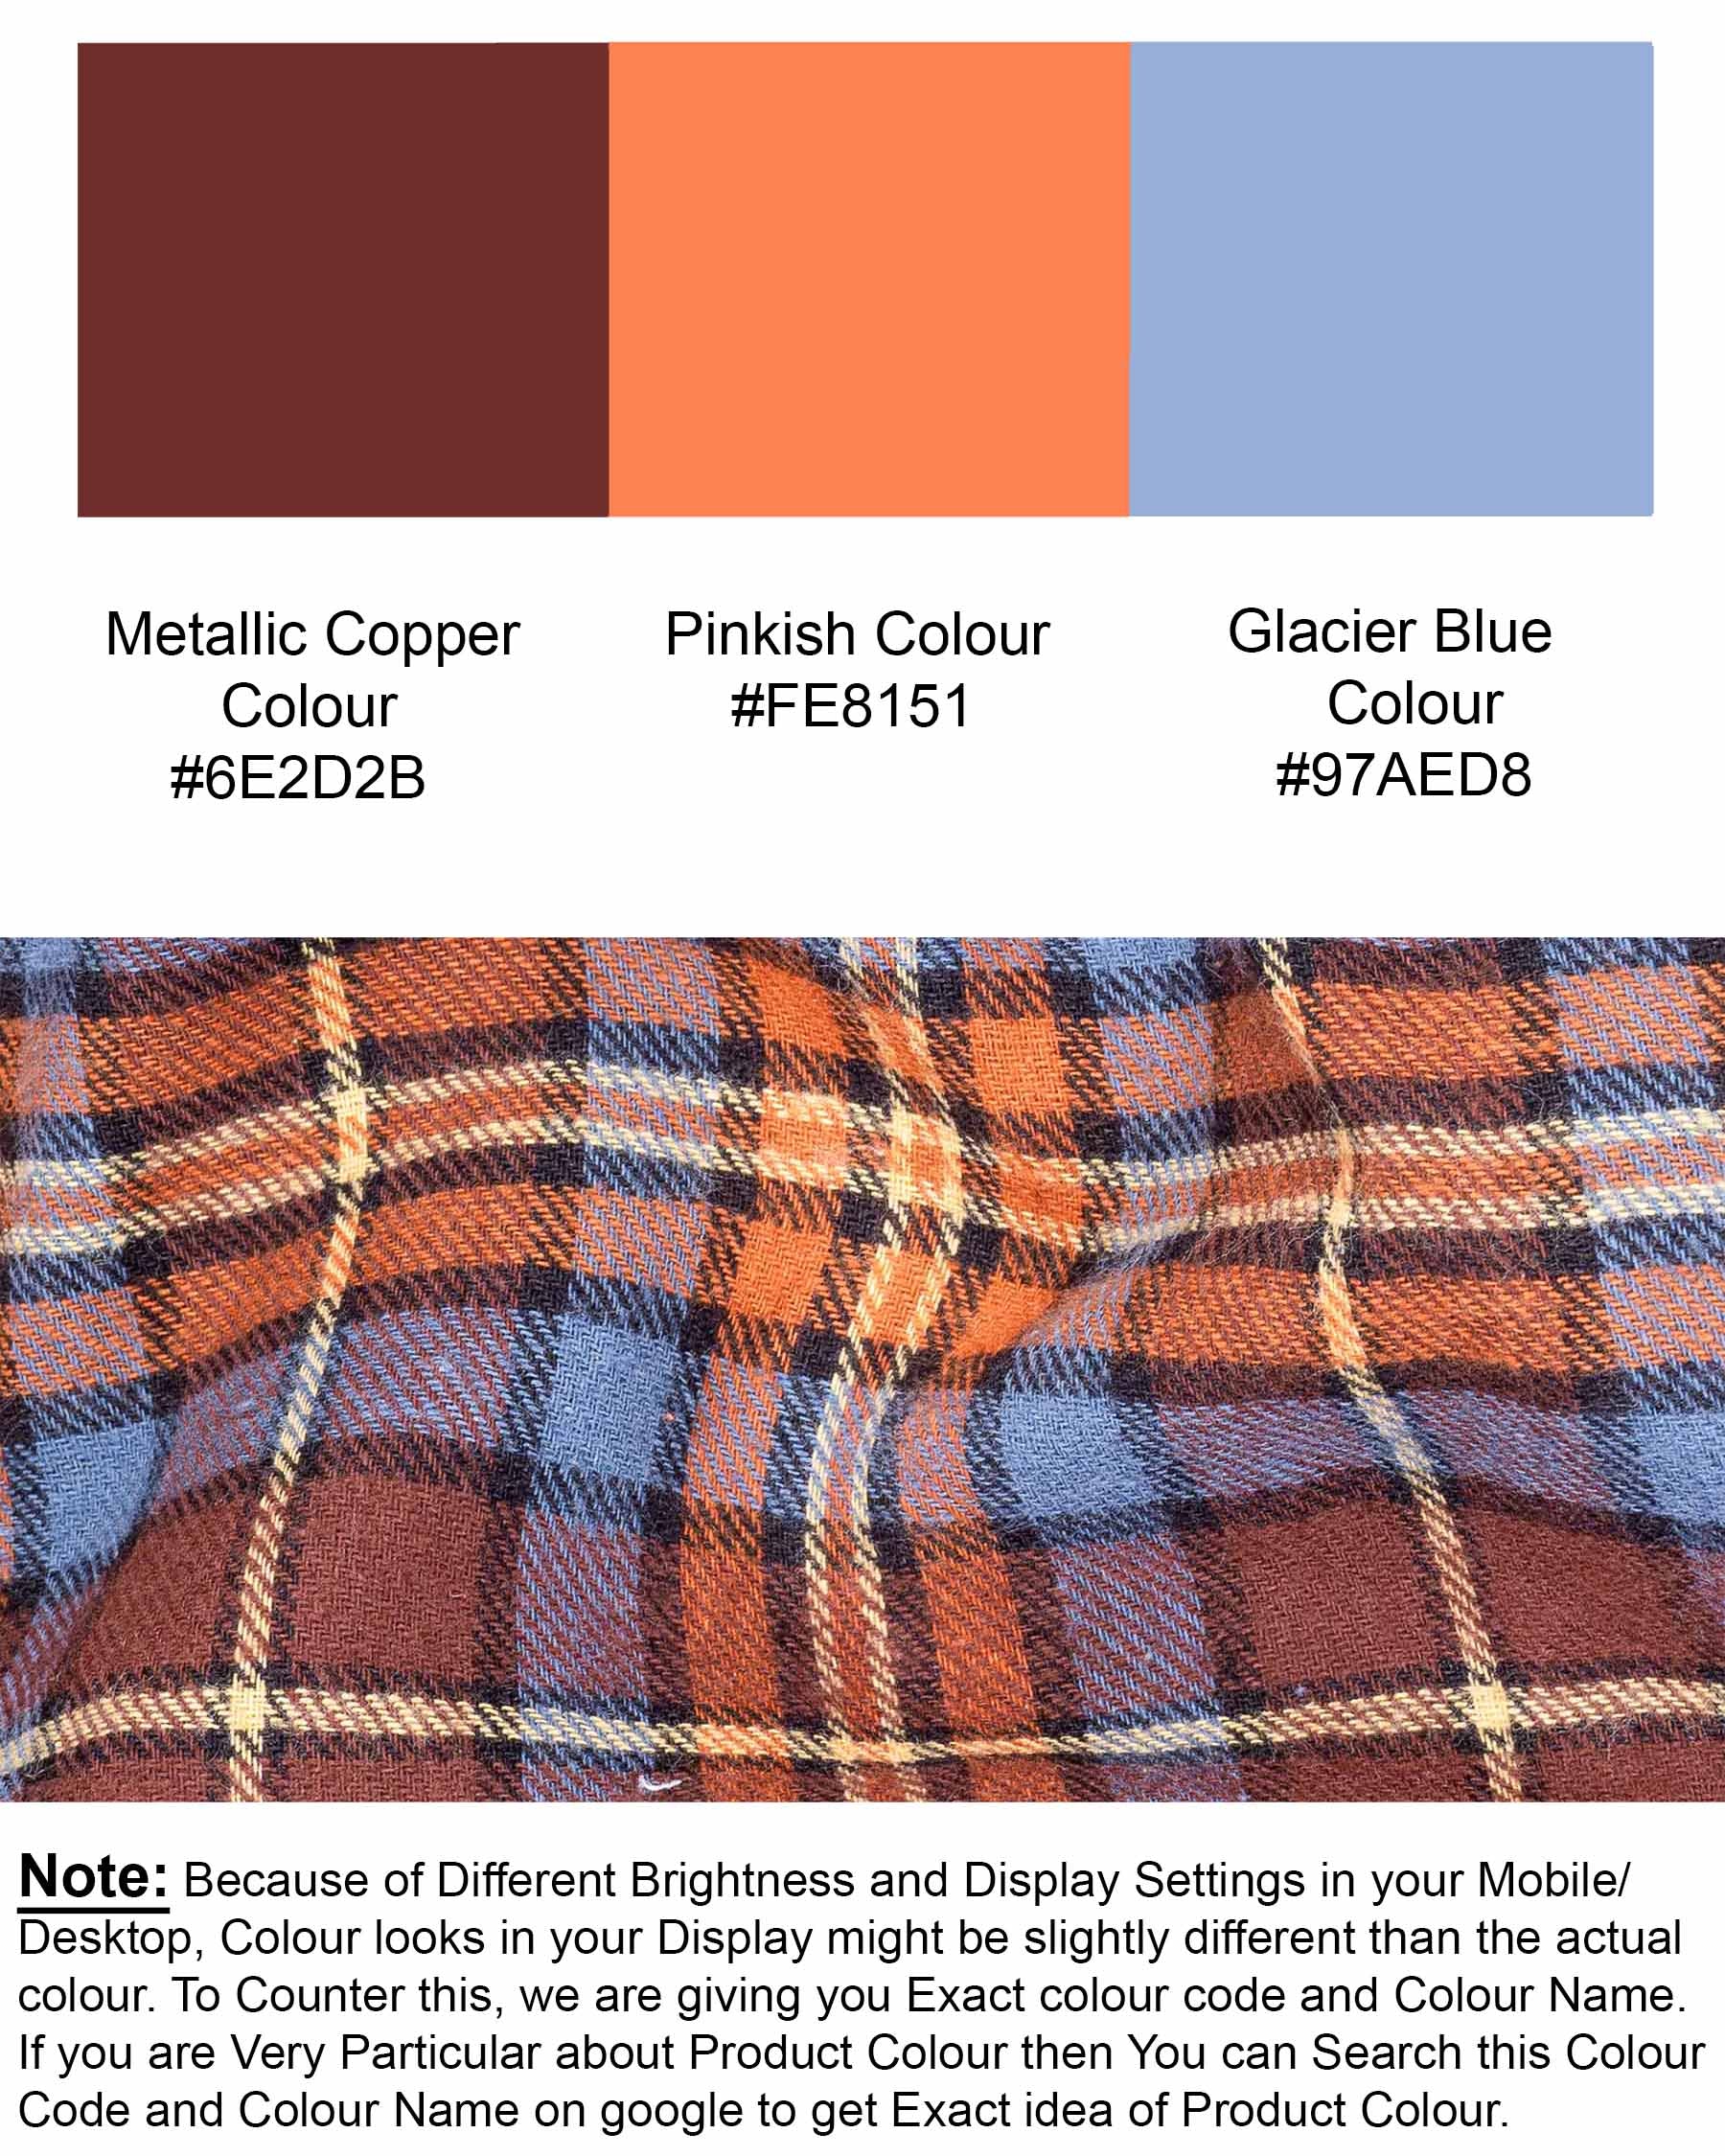 Metallic Copper with Pinkish Plaid Flannel Shirt 6969-BD-38,6969-BD-H-38,6969-BD-39,6969-BD-H-39,6969-BD-40,6969-BD-H-40,6969-BD-42,6969-BD-H-42,6969-BD-44,6969-BD-H-44,6969-BD-46,6969-BD-H-46,6969-BD-48,6969-BD-H-48,6969-BD-50,6969-BD-H-50,6969-BD-52,6969-BD-H-52